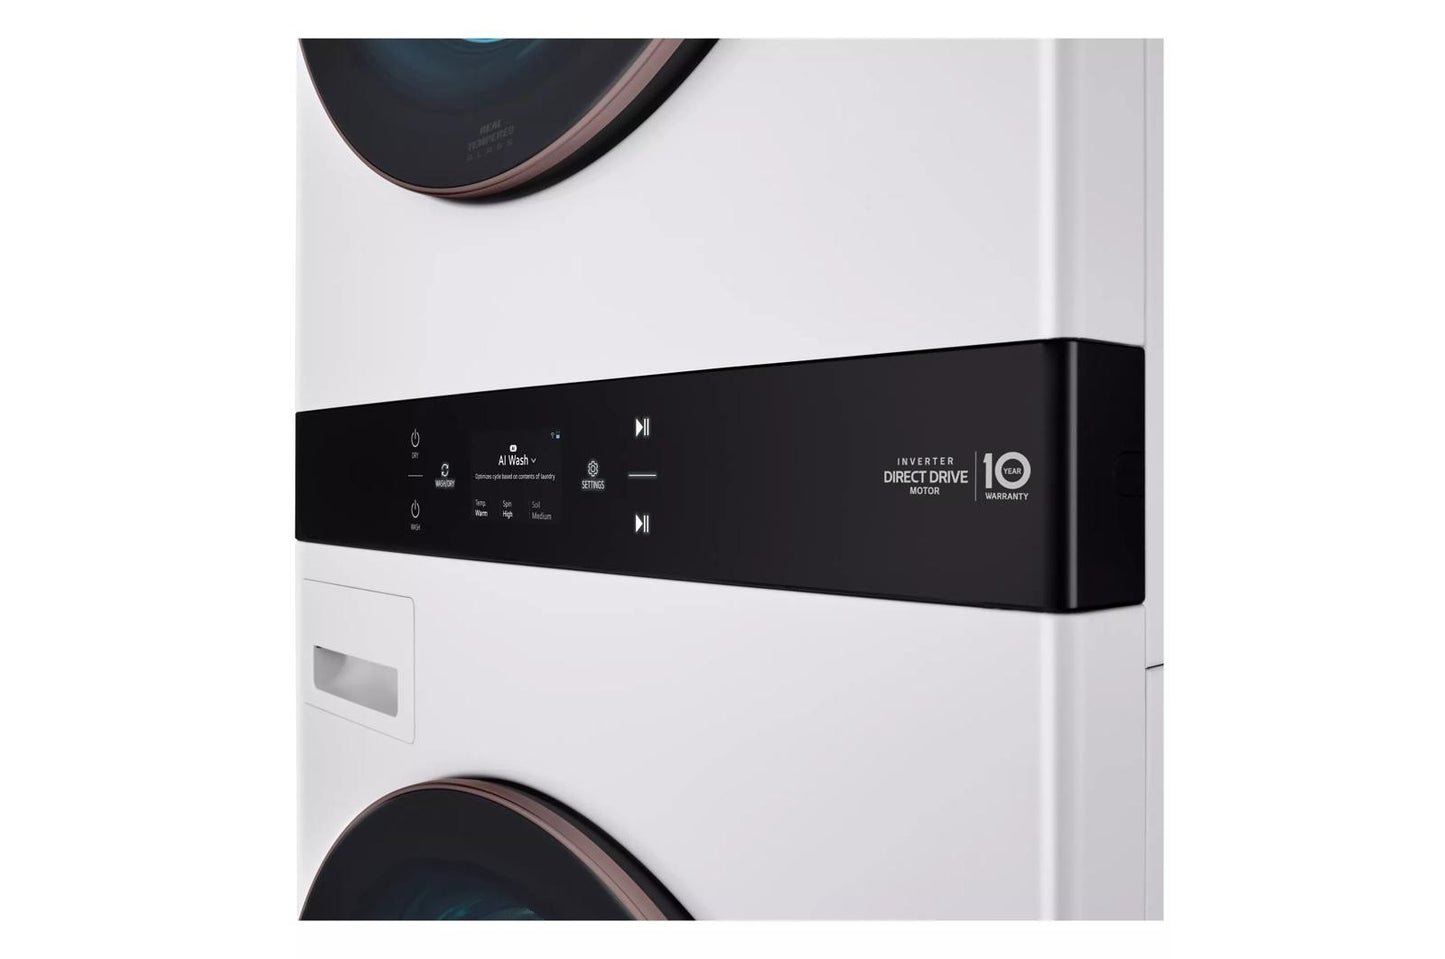 Lg SWWE50W4 Lg Studio Washtower&#8482; Smart Front Load 5.0 Cu. Ft. Washer And 7.4 Cu. Ft. Electric Dryer With Center Control&#8482;